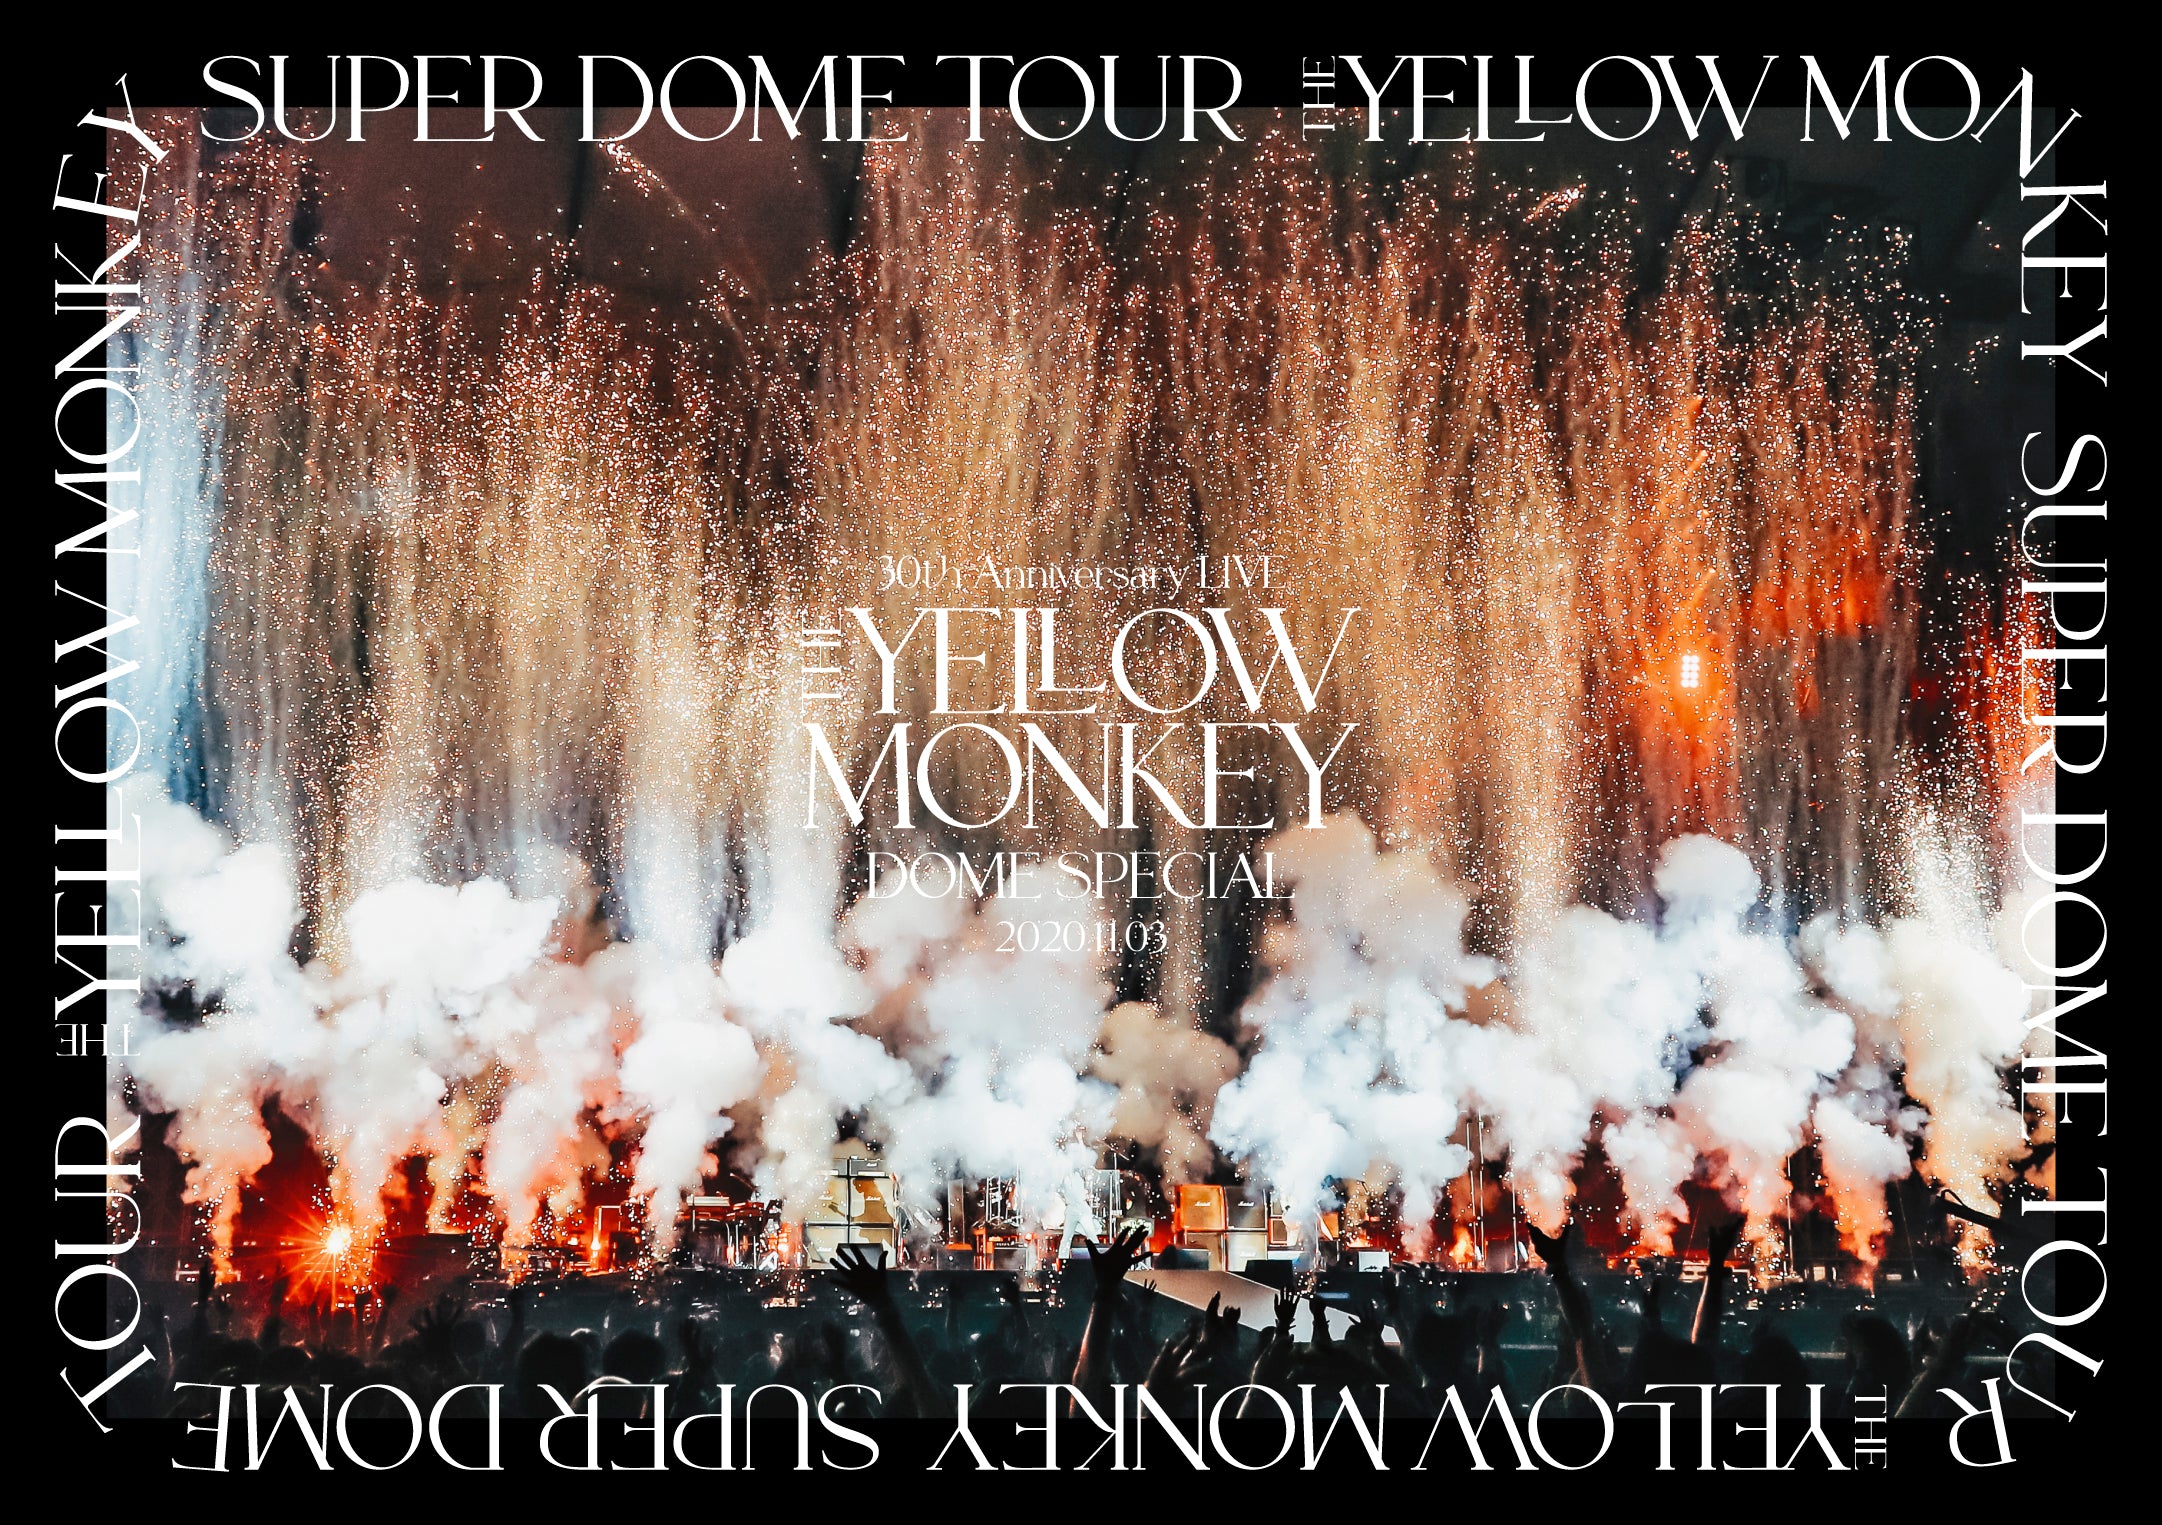 THE YELLOW MONKEY SUPER DOME TOUR BOXCDDVD - ミュージック